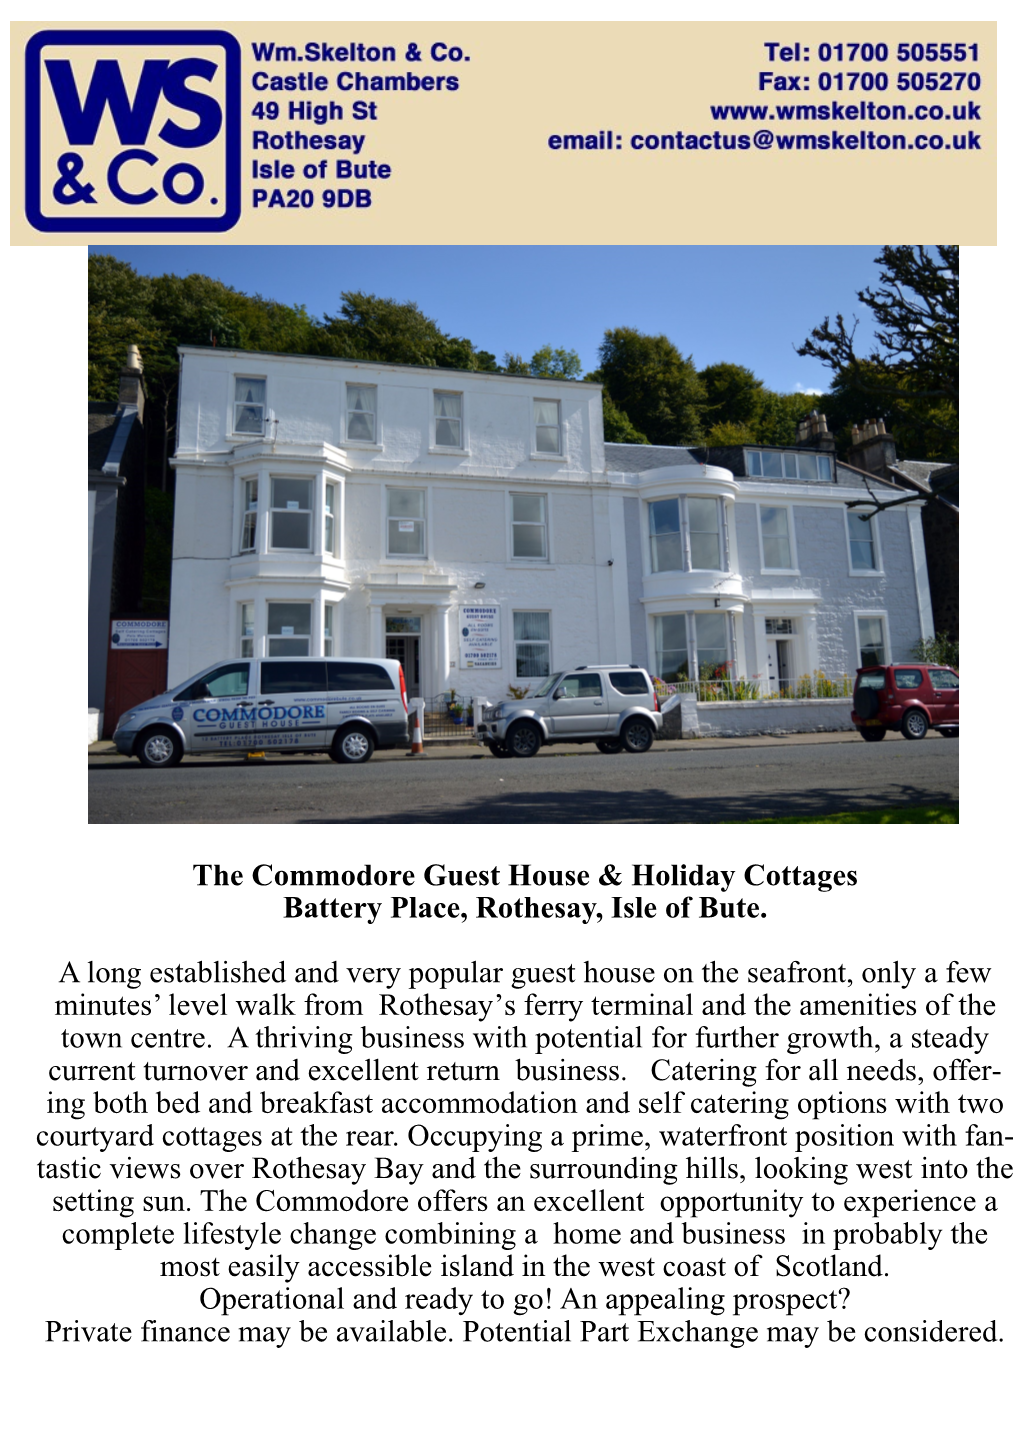 The Commodore Guest House & Holiday Cottages Battery Place